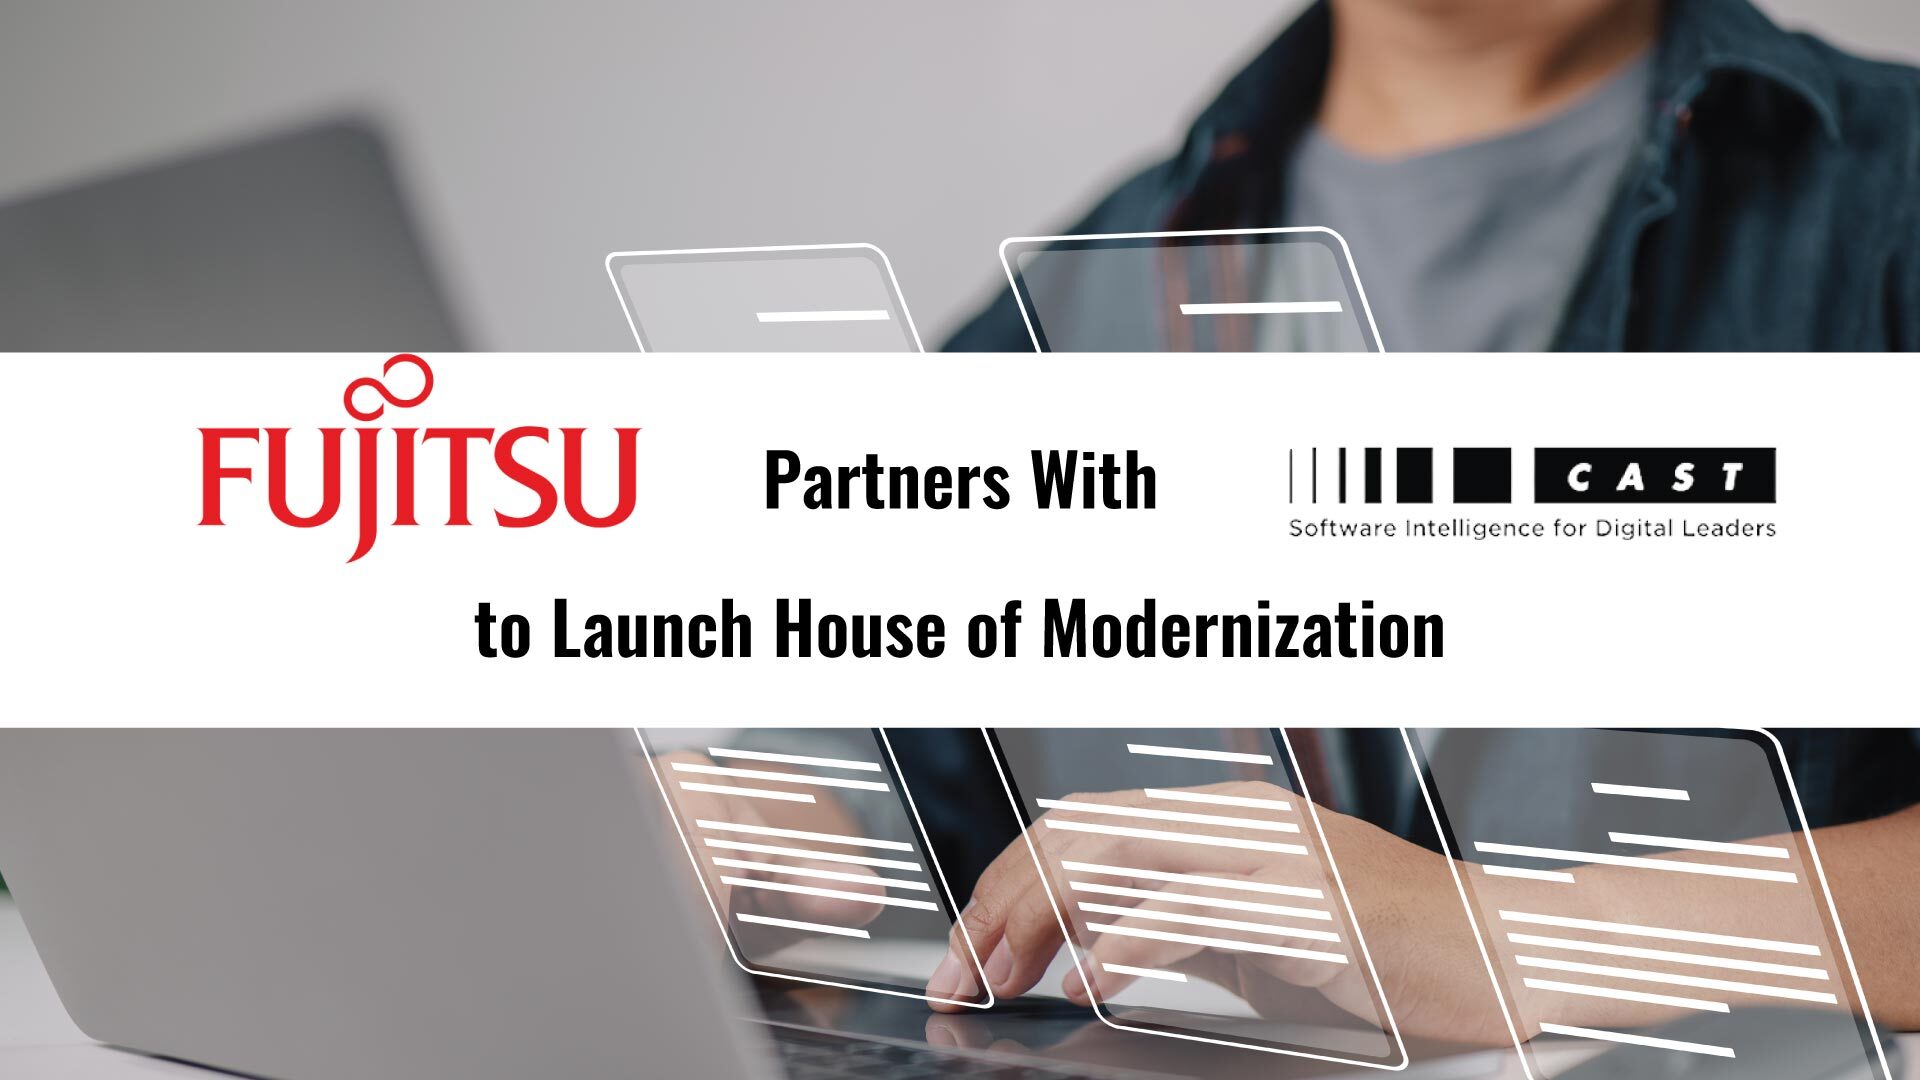 Fujitsu partners with CAST to launch House of Modernization focused on digital transformation at scale